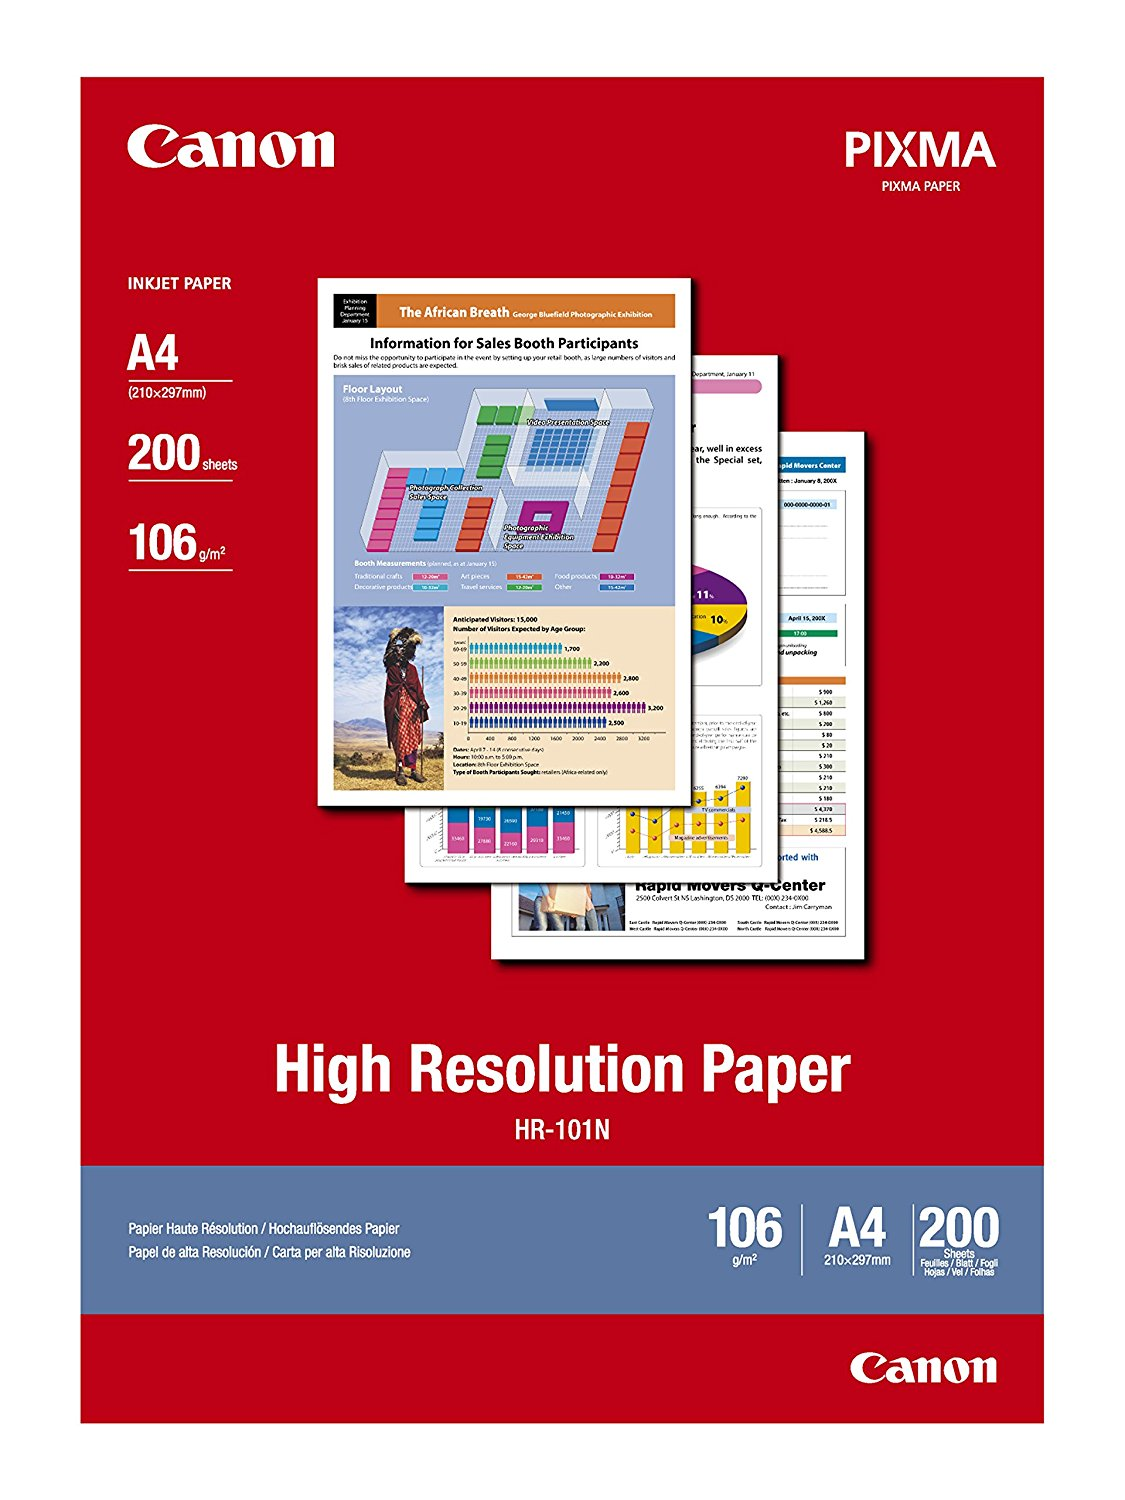 Paper Canon HR101 High Resolution Paper | 106g | A4 | 200sheets foto papīrs